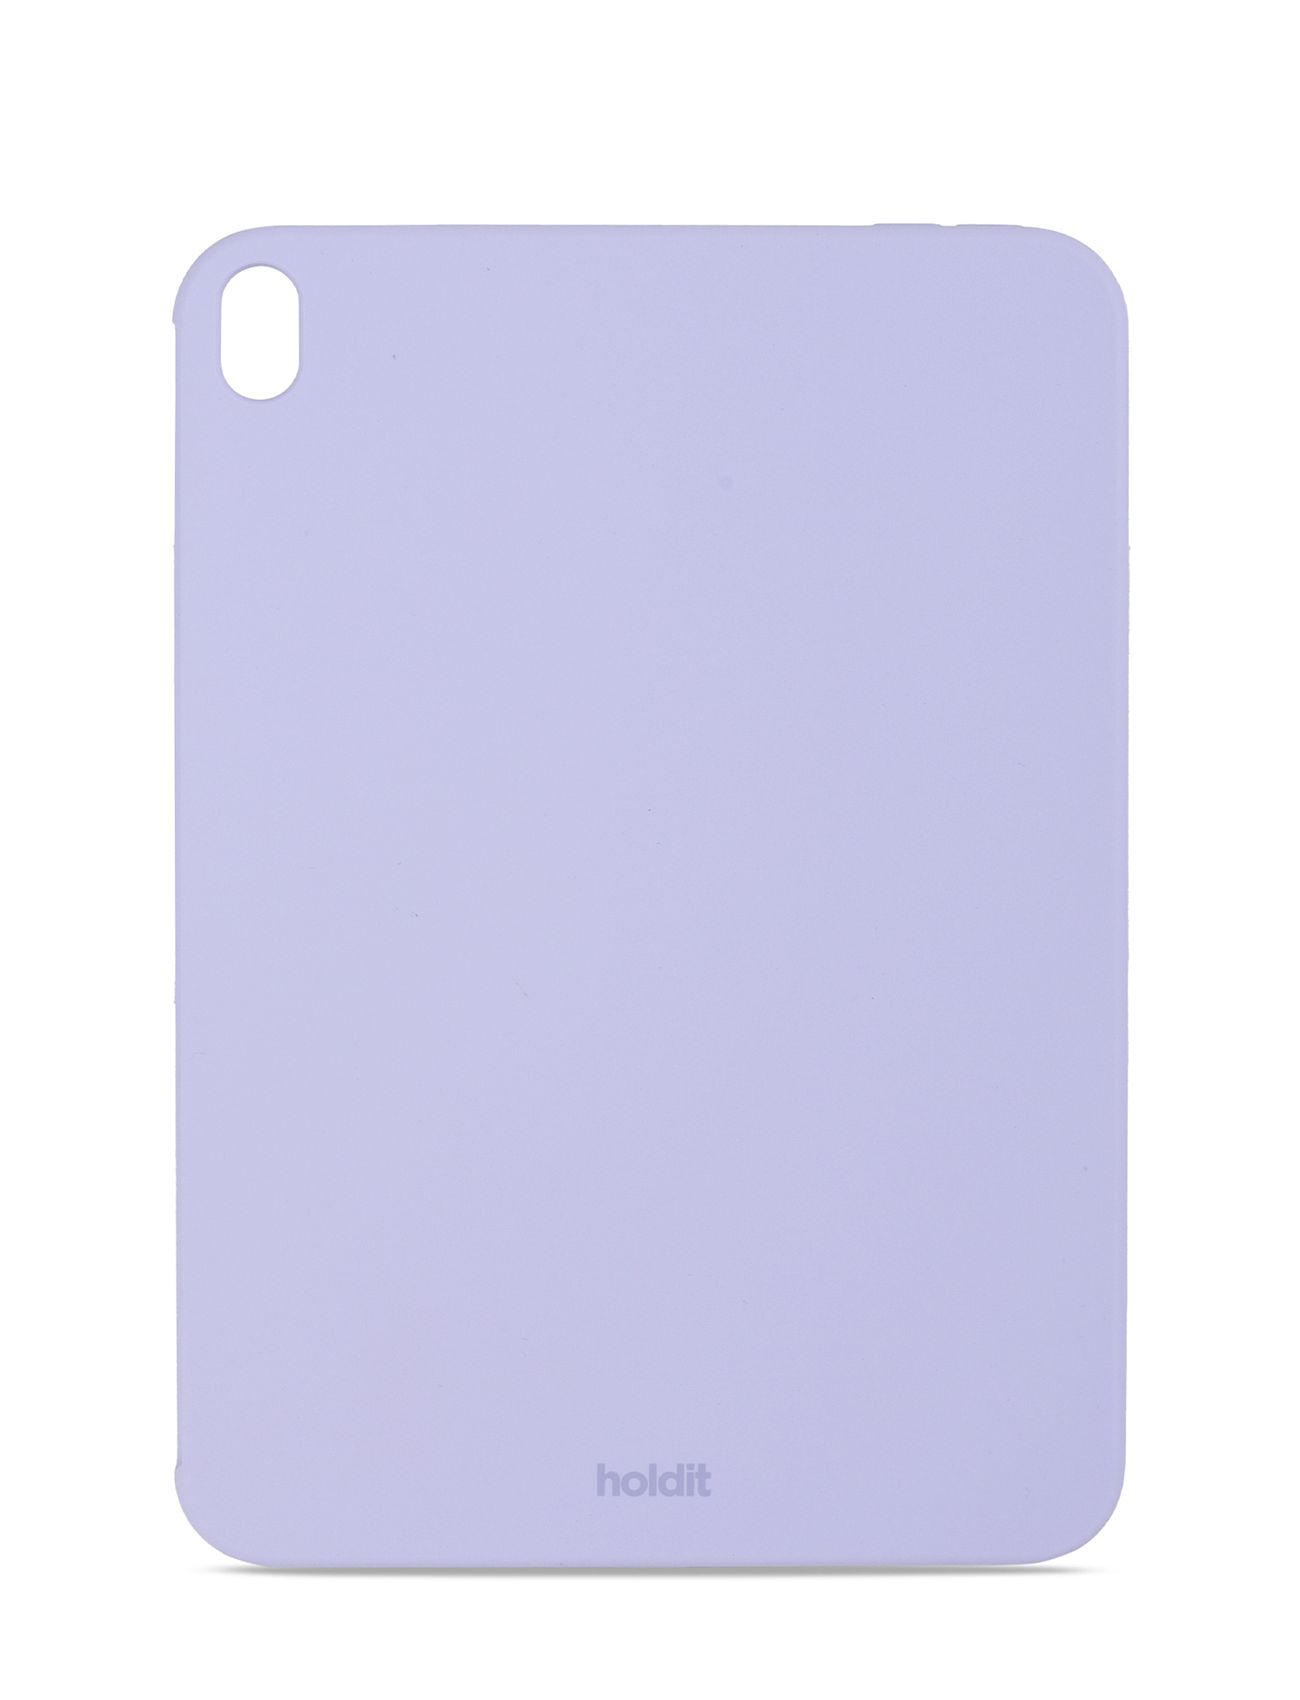 Silic Case Ipad Air 10.9 Mobilaccessory-covers Tablet Cases Purple Holdit